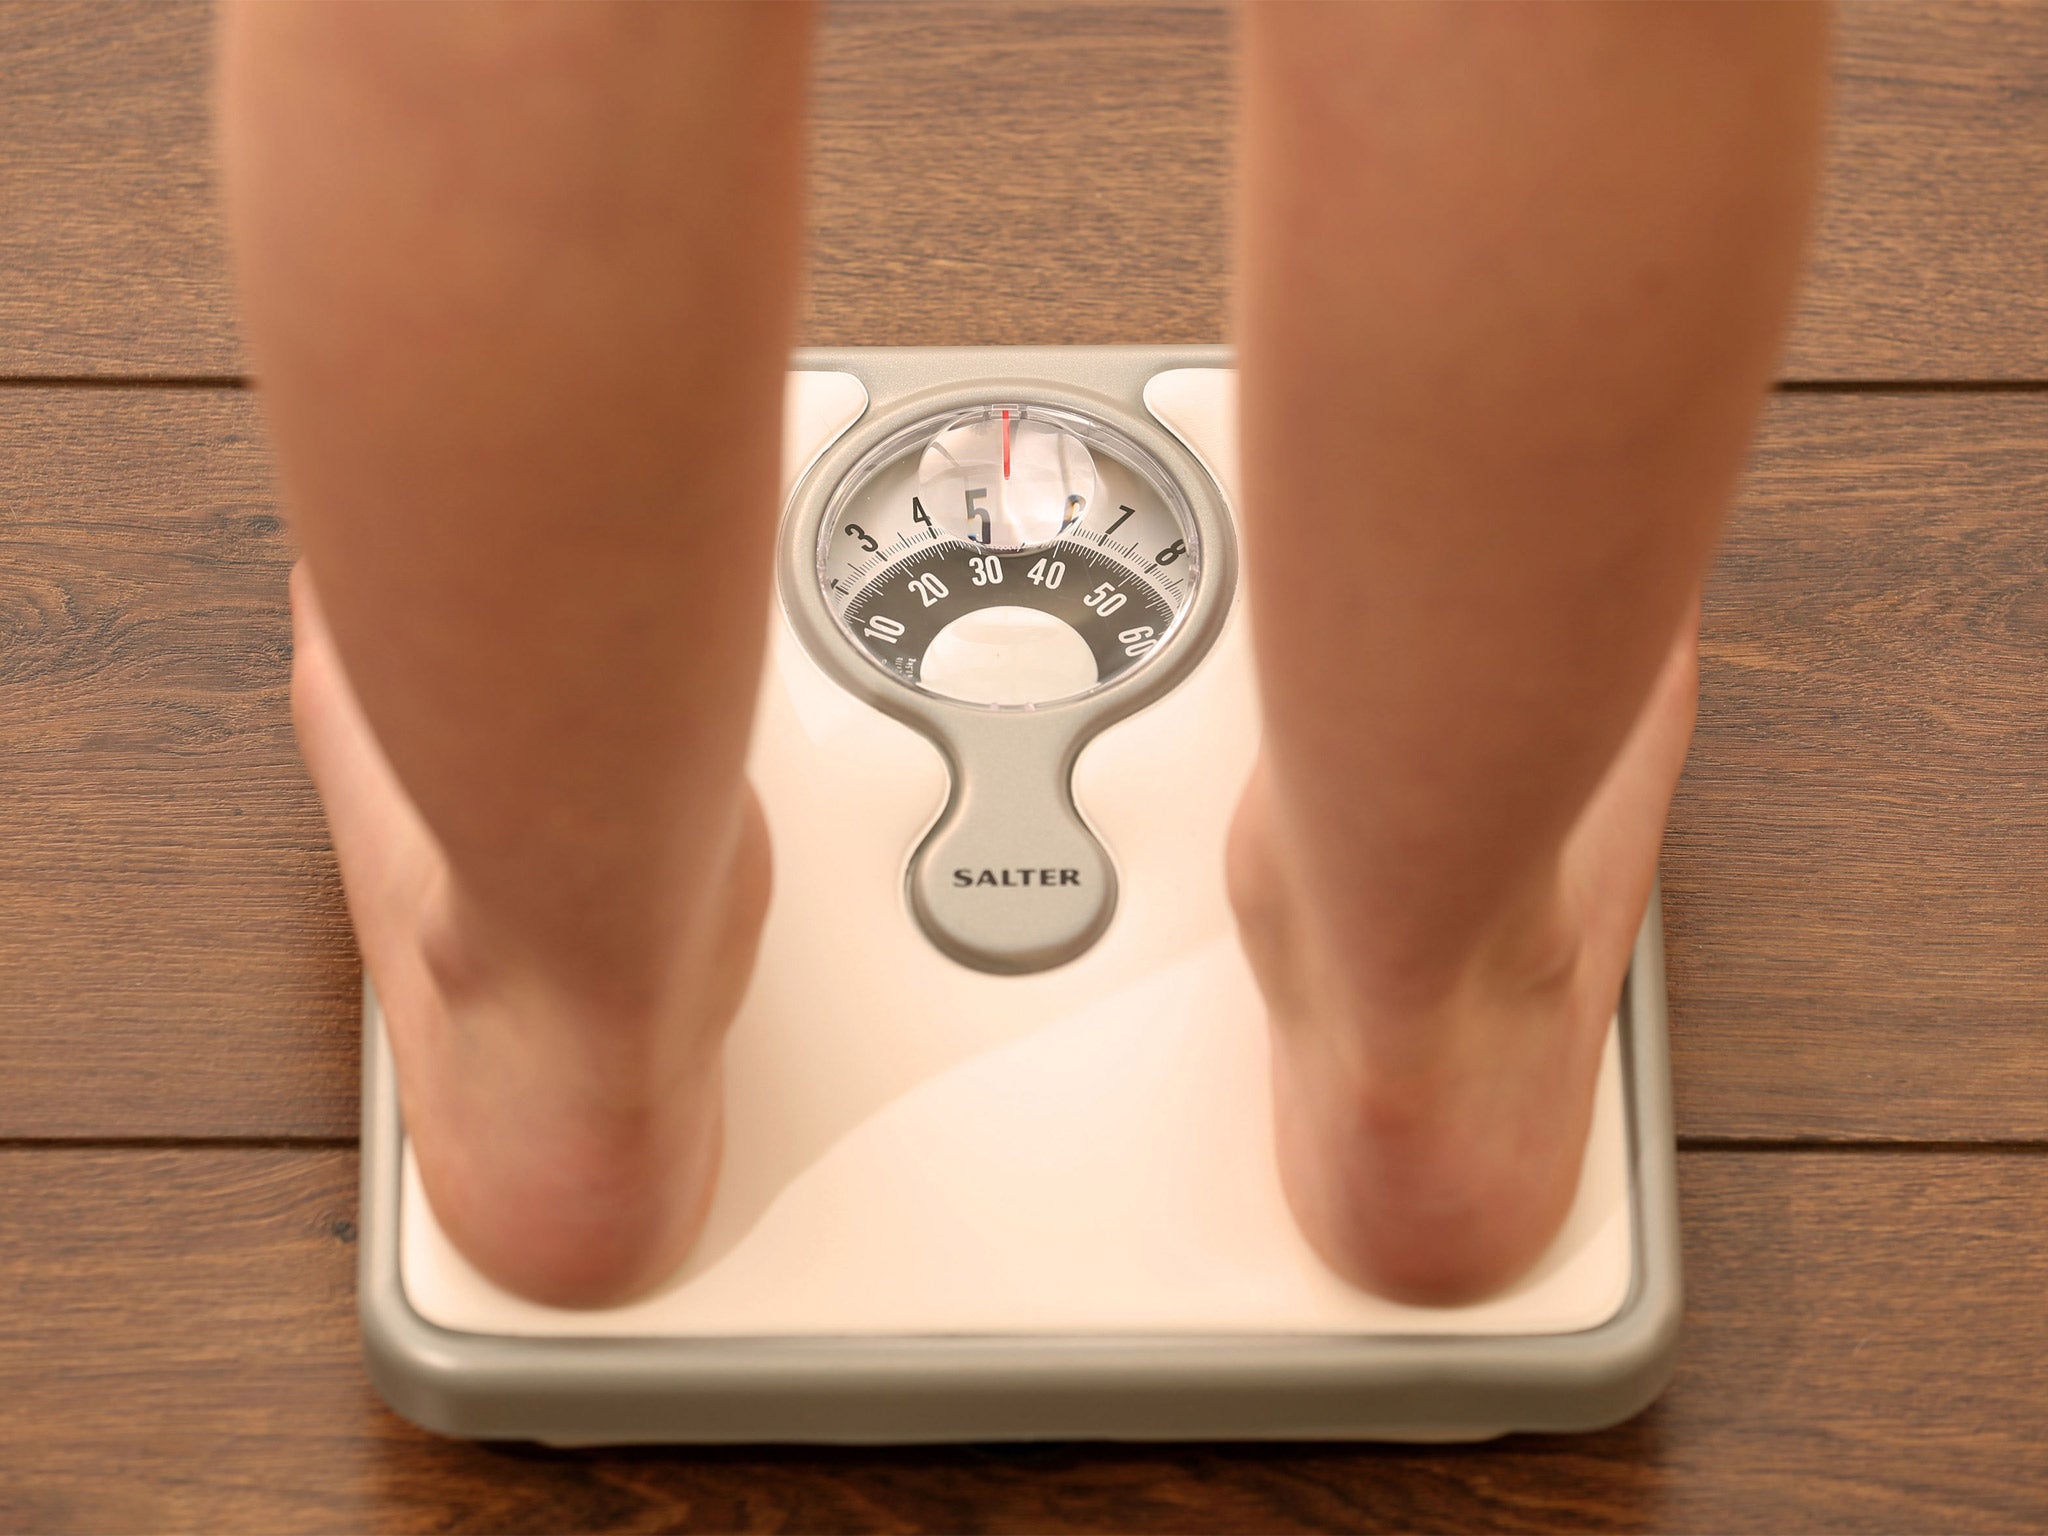 New research suggests children whose parents have divorced are more likely to be obese